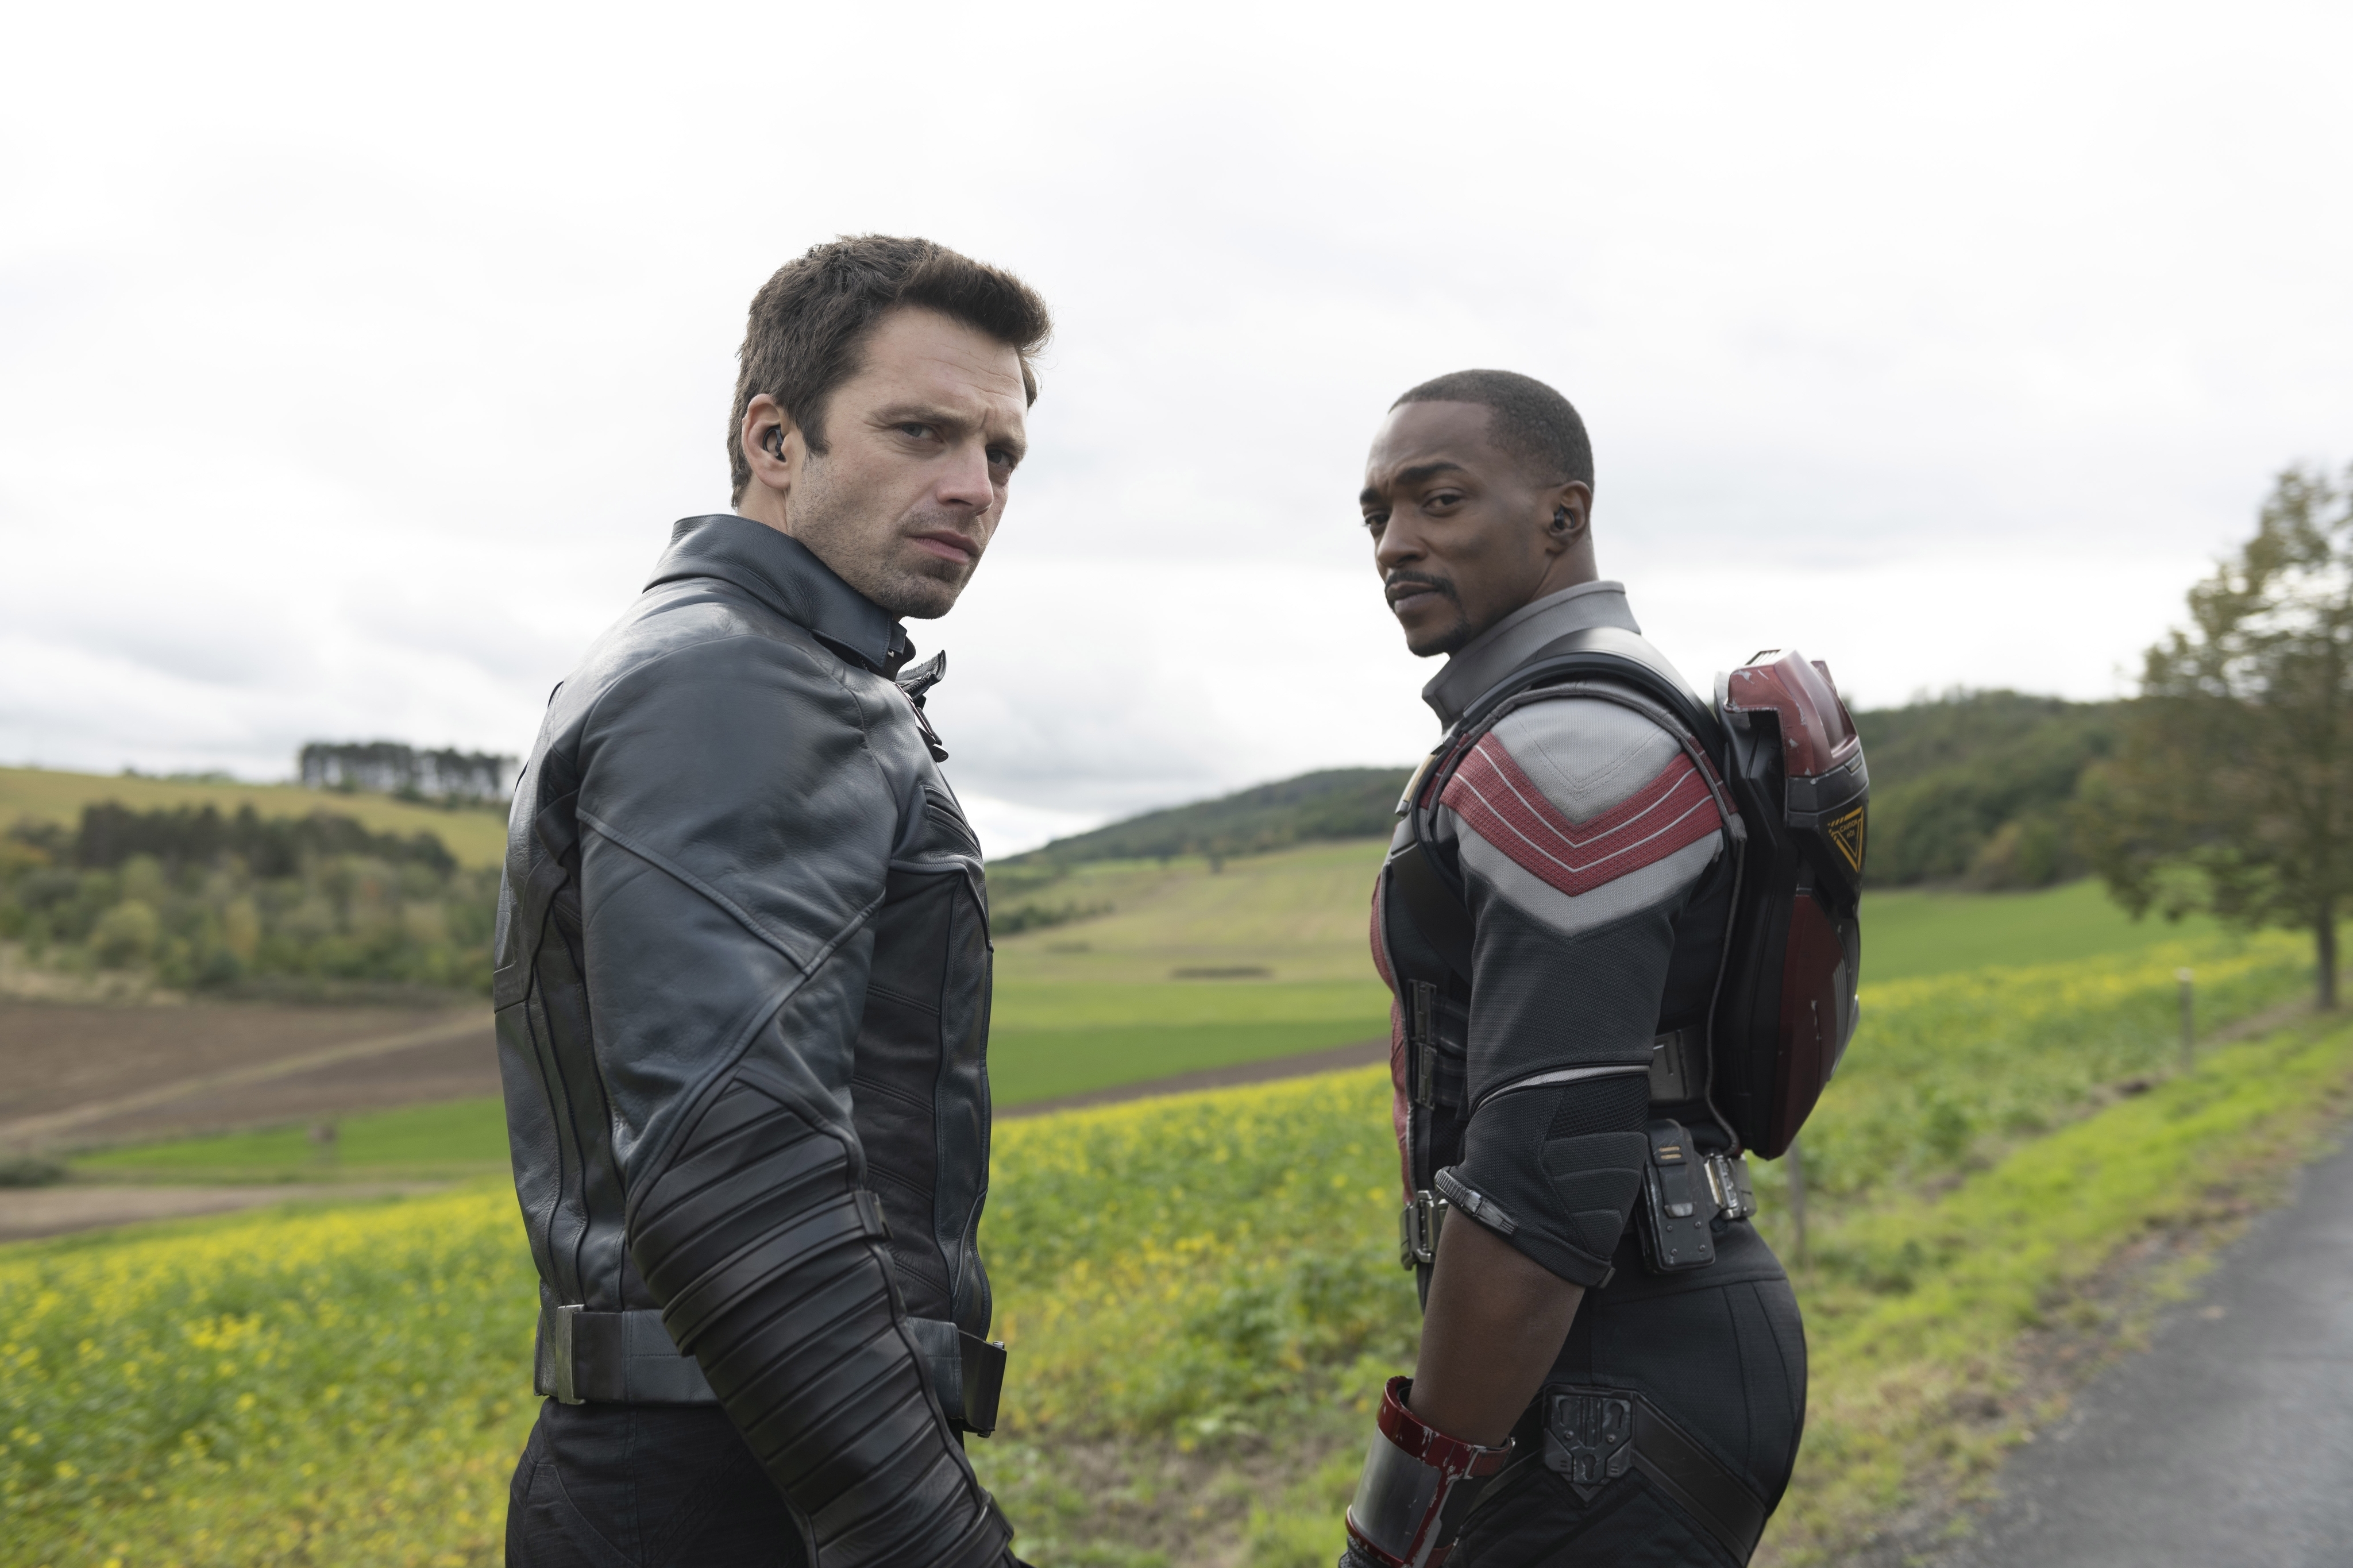 Bucky Barnes, The Winter Soldier, and Sam Wilson, The Falcon, look over their shoulders in the direction of the camera. Behind them is a lush green field and an overcast sky.